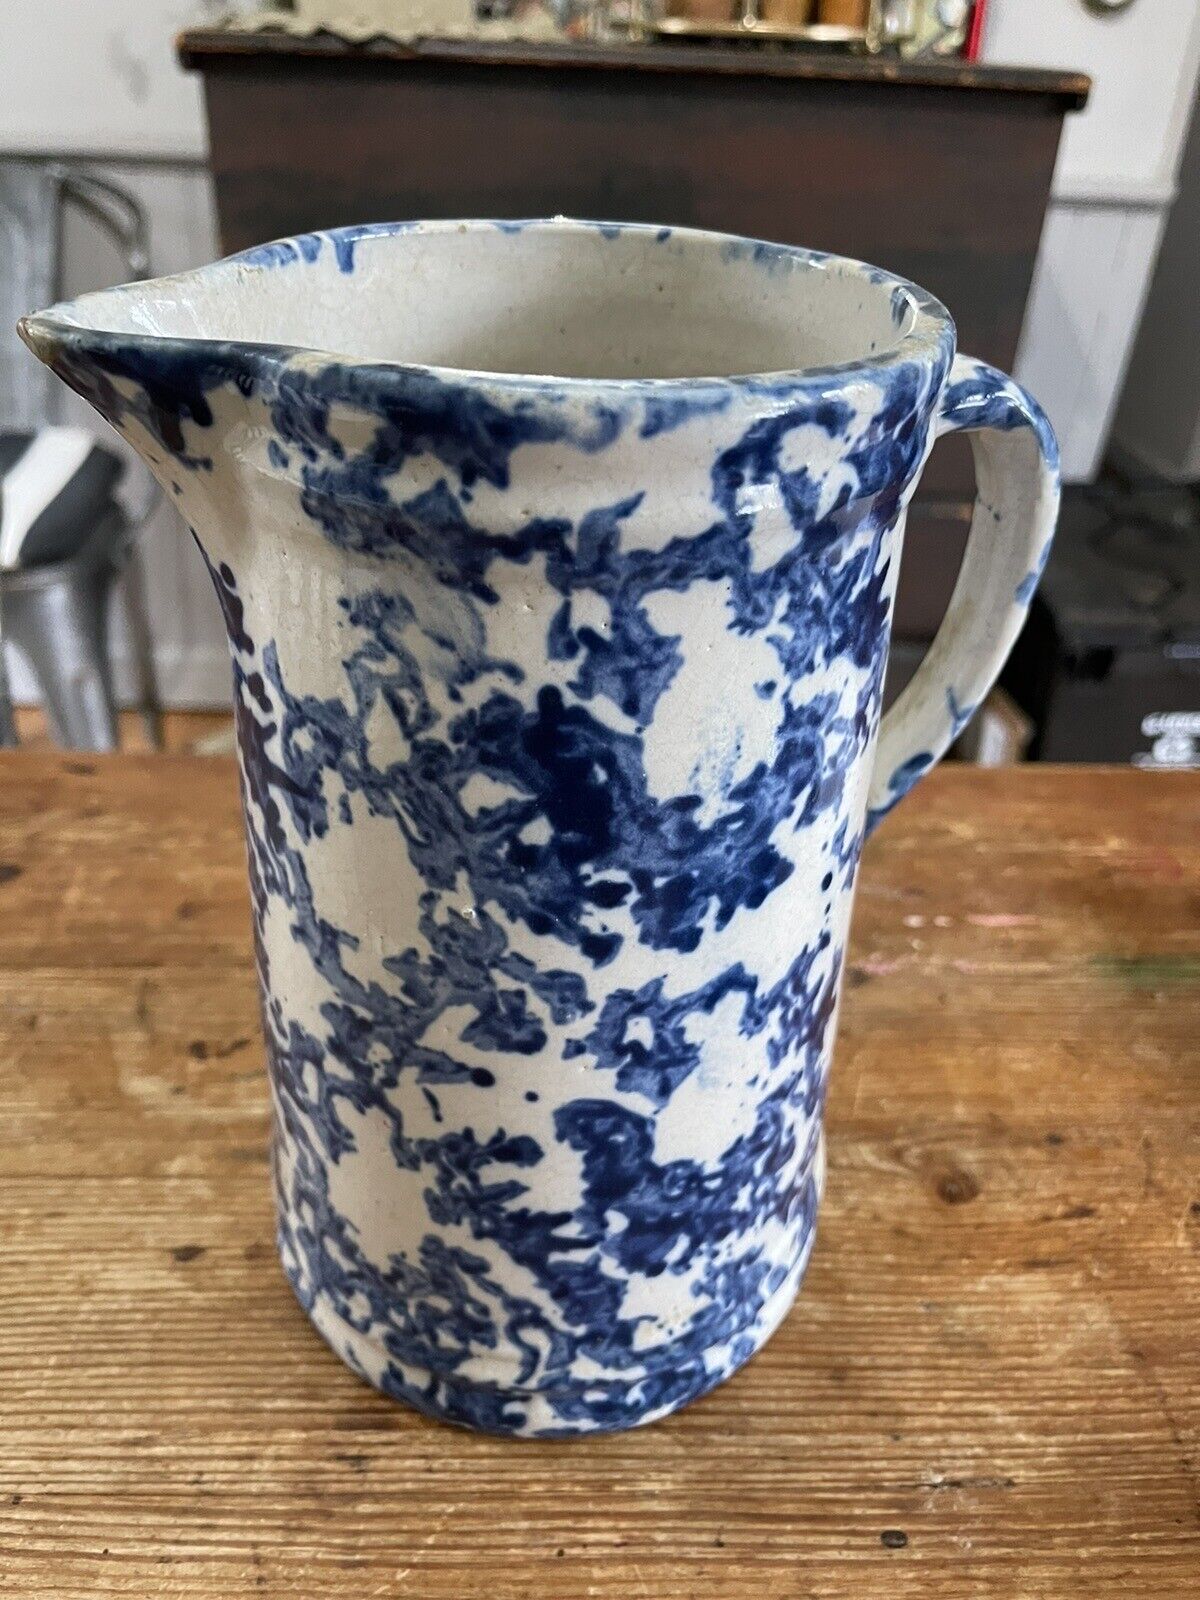 Antique Spongeware Pitcher With Strong Blue and White Color